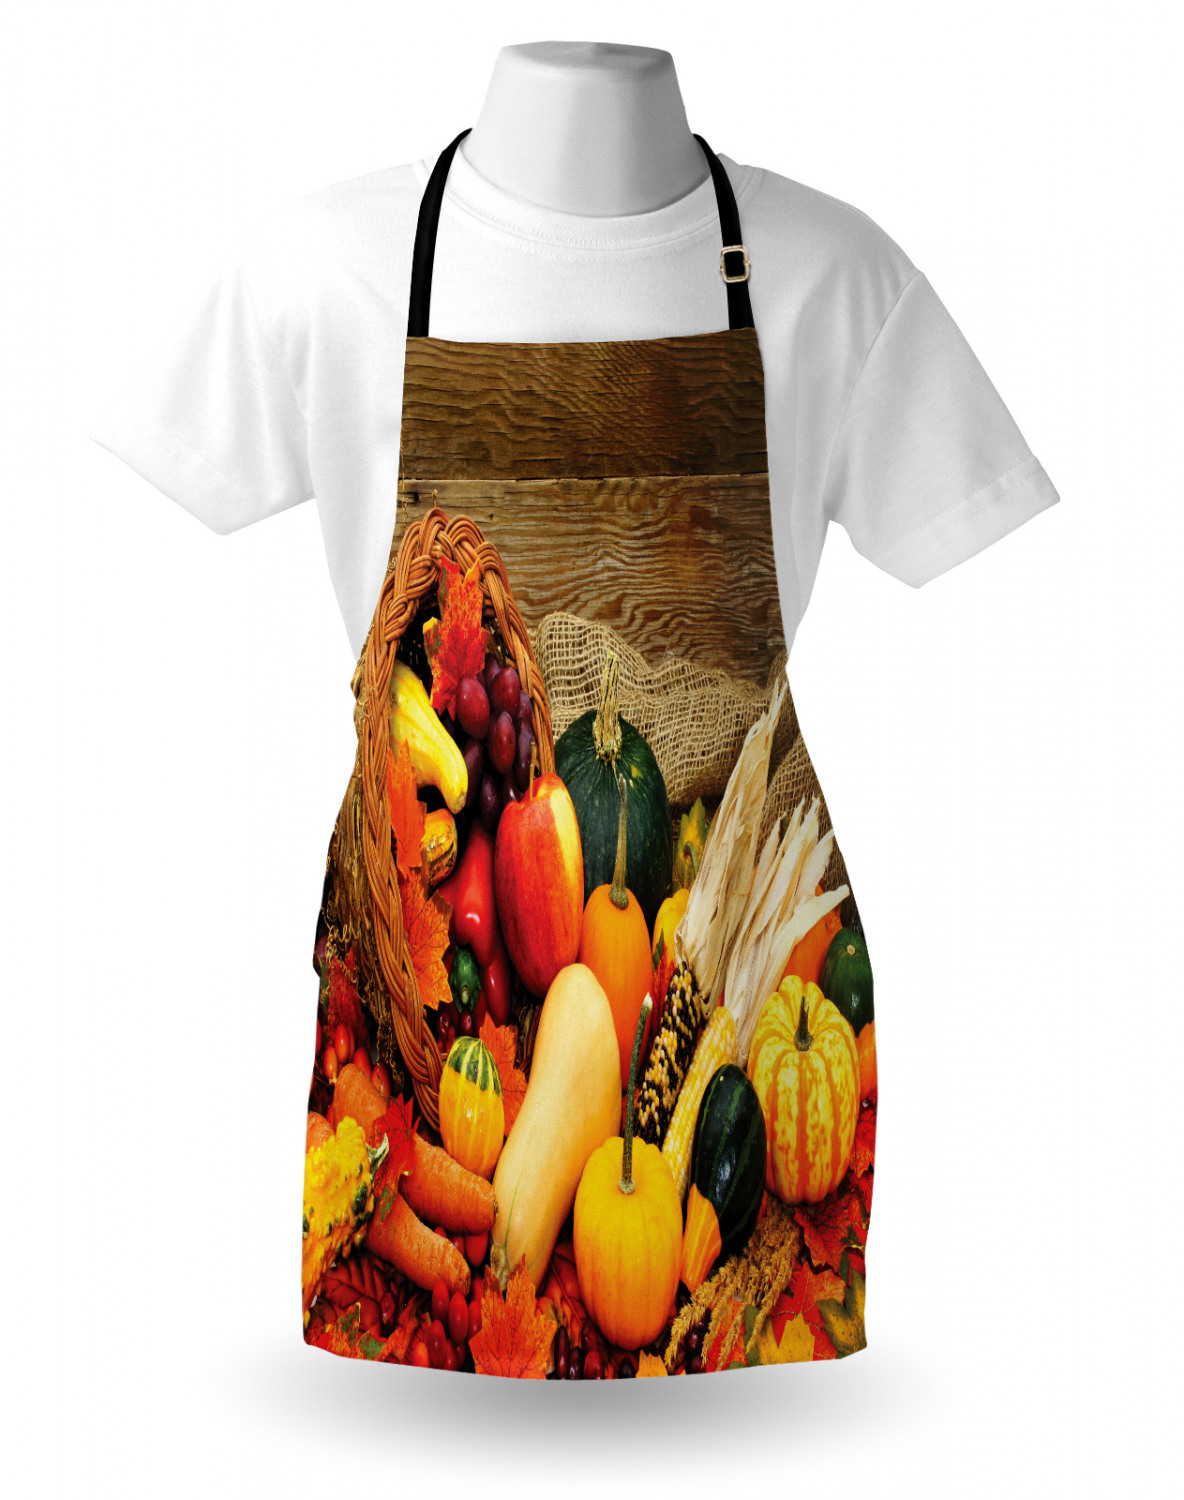 Details about   Ambesonne Durable Apron Bib with Adjustable Neck Cooking Gardening 